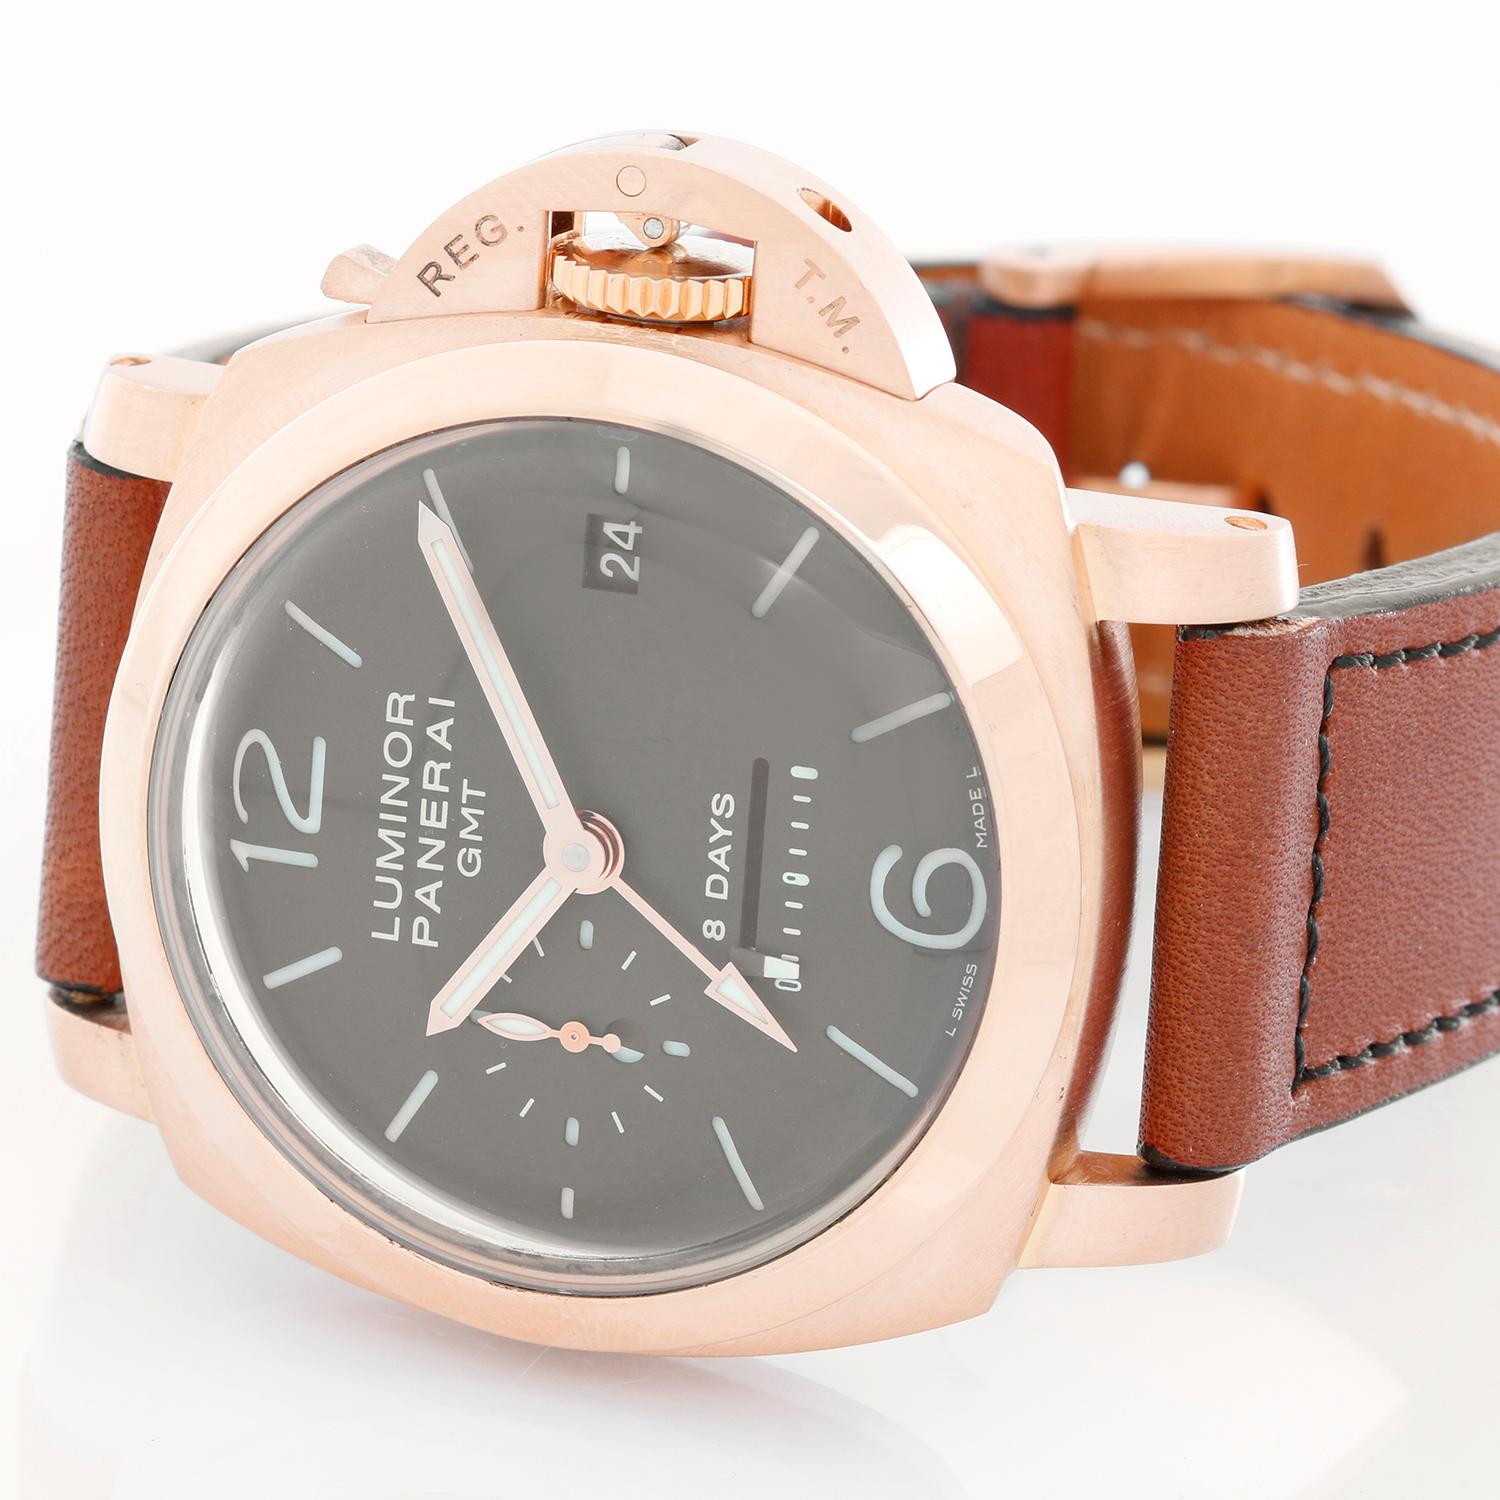 Panerai Luminor 1950 8 Days GMT Men's 18k Rose Gold Watch PAM 289 - Manual winding. 18k rose gold case with exposition back (44mm diameter). Brown dial with luminous style stick markers and Arabic numerals; date at 3 o'clock; 8-day power reserve